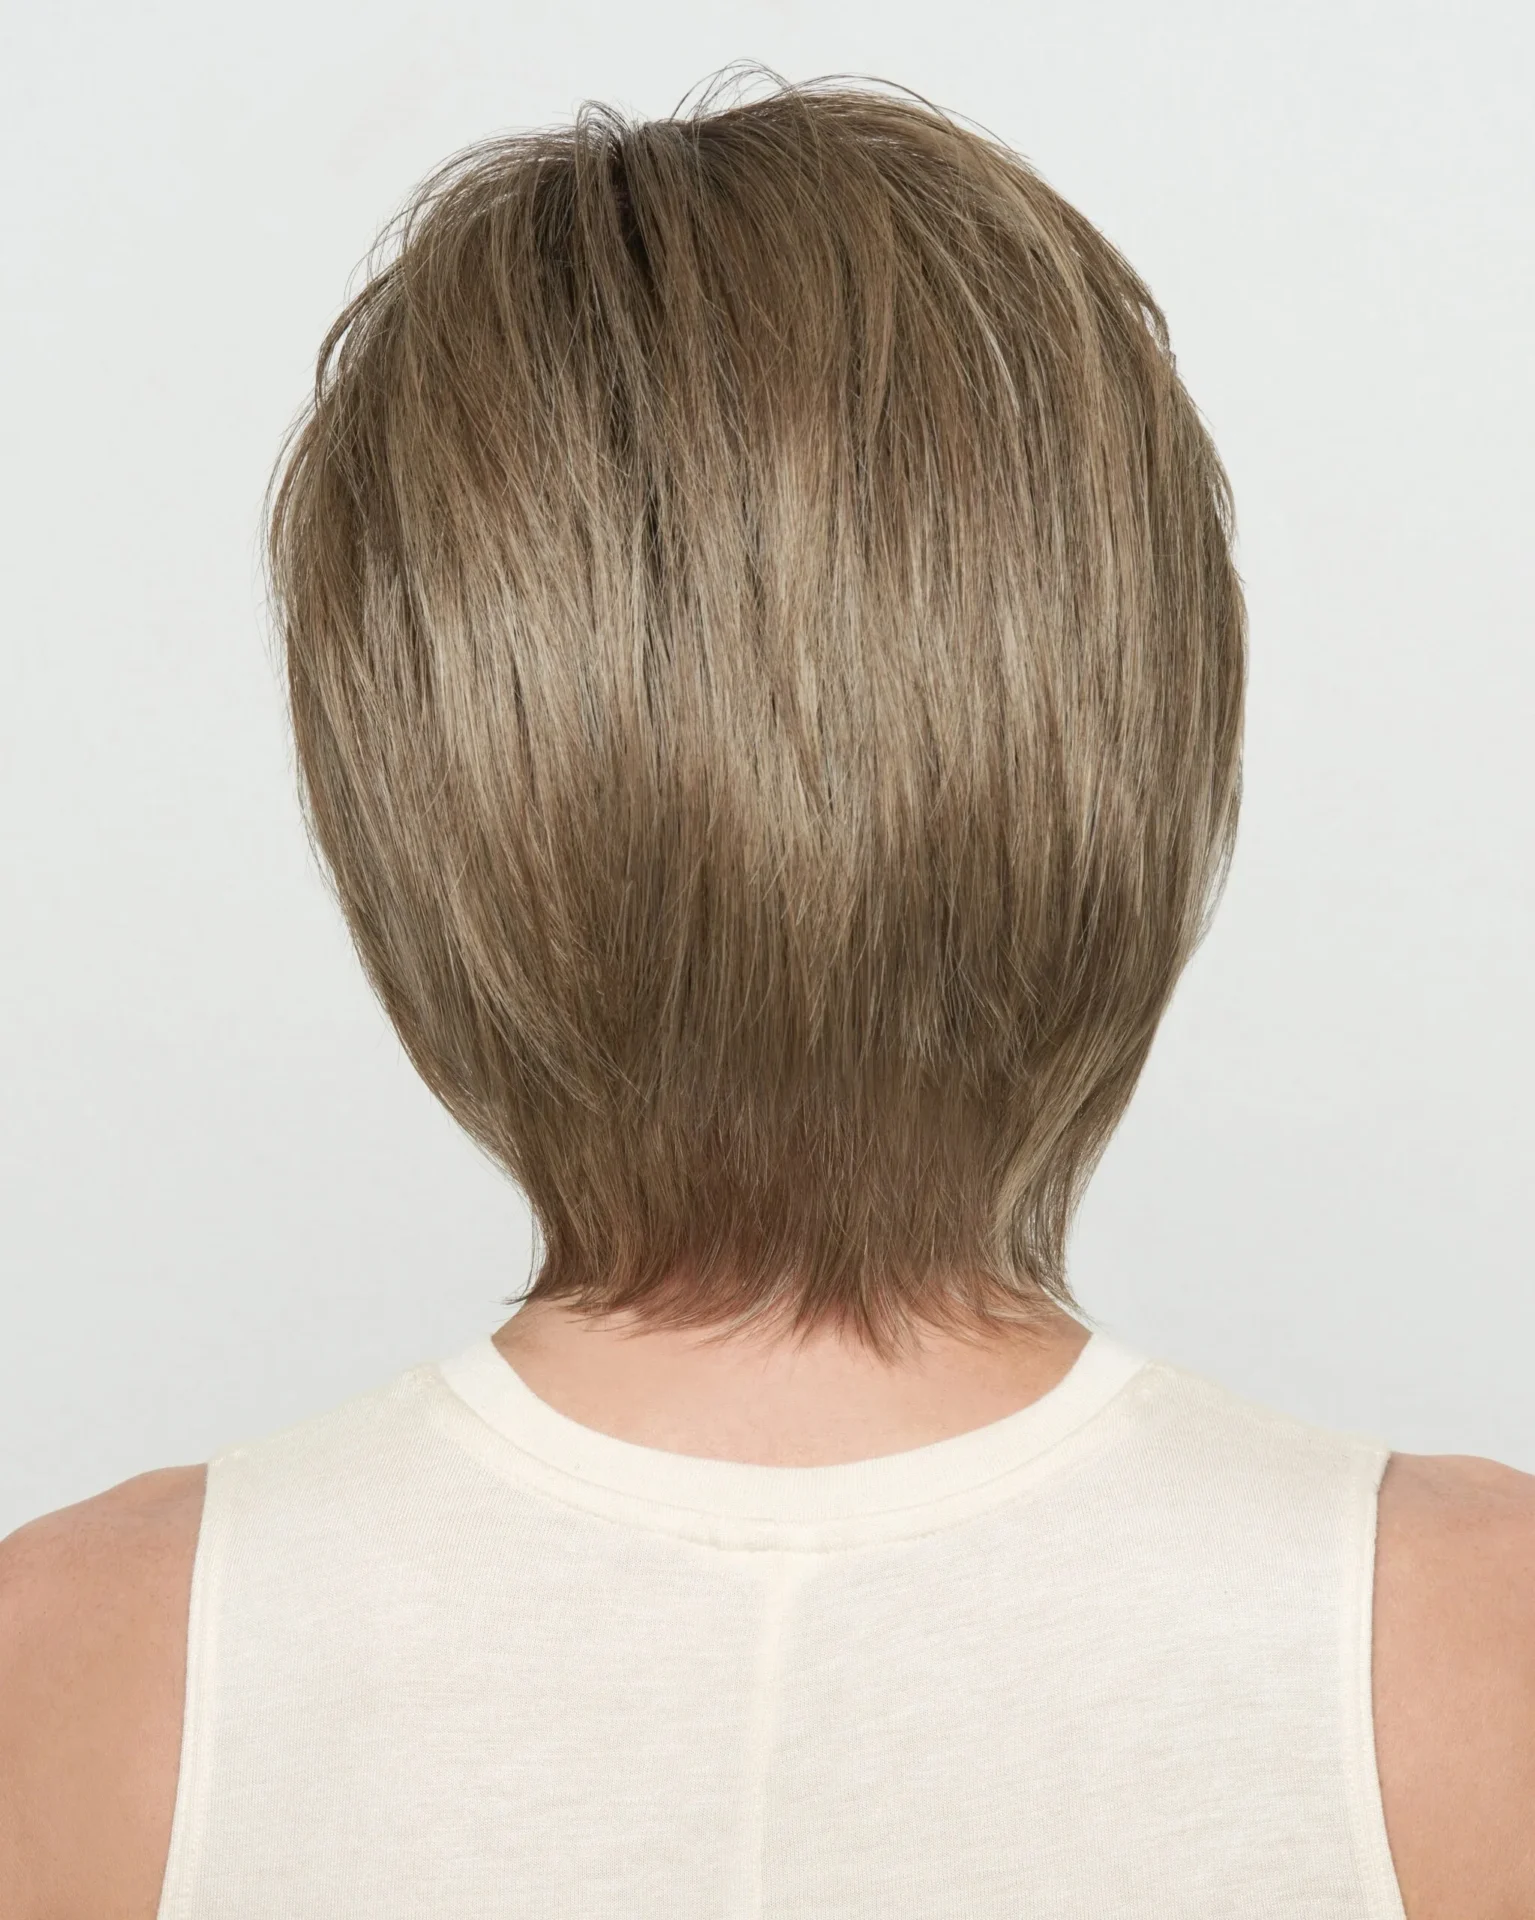 The back view of a woman with a short blonde wig.